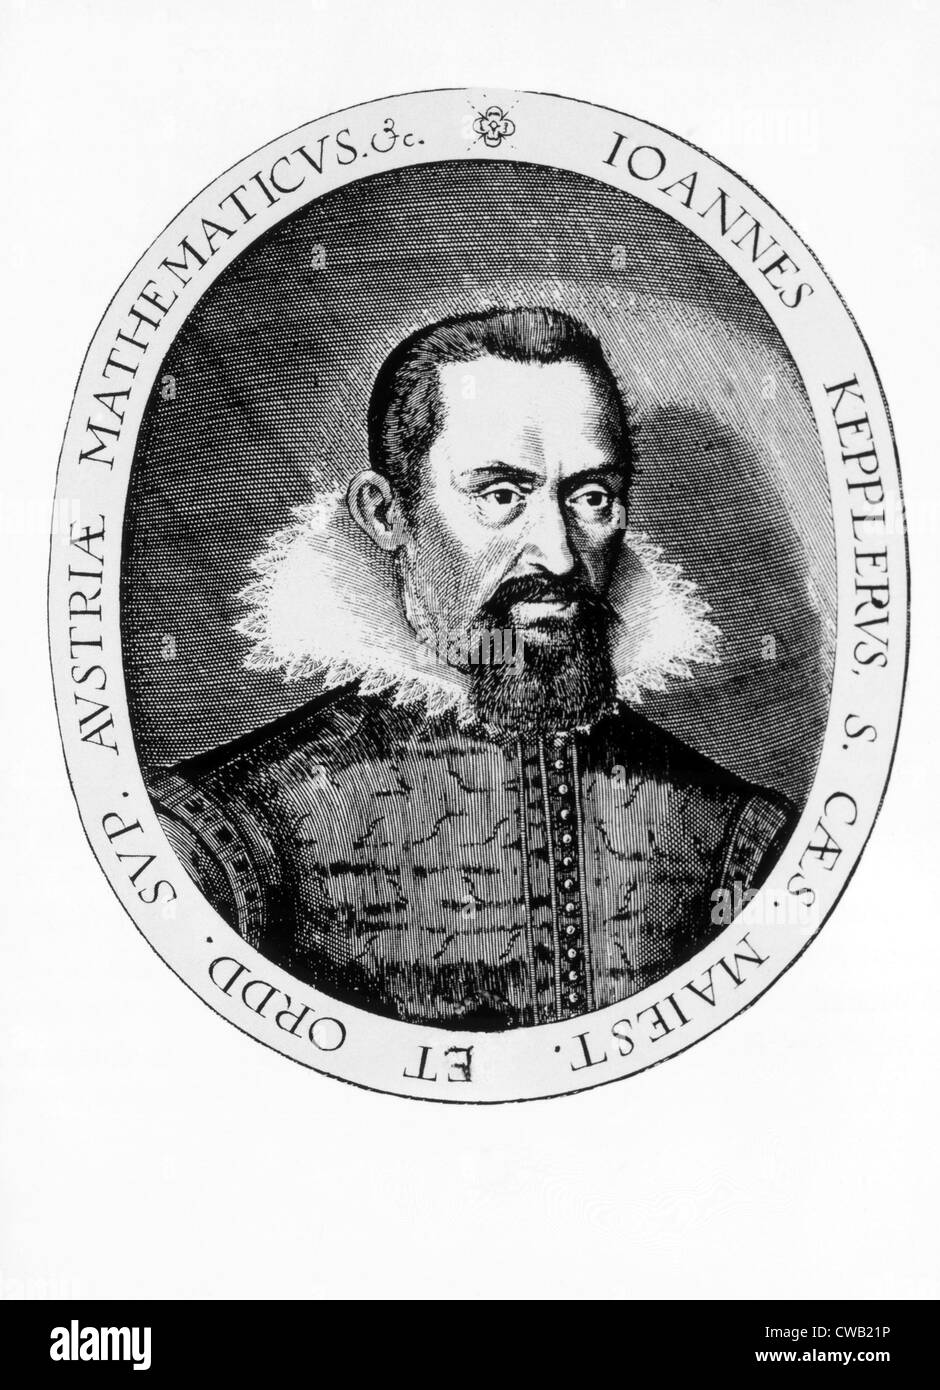 Johannes Kepler (1571-1630), frontispiece portrait from 'Rudolphine Tables,' 1627 Stock Photo